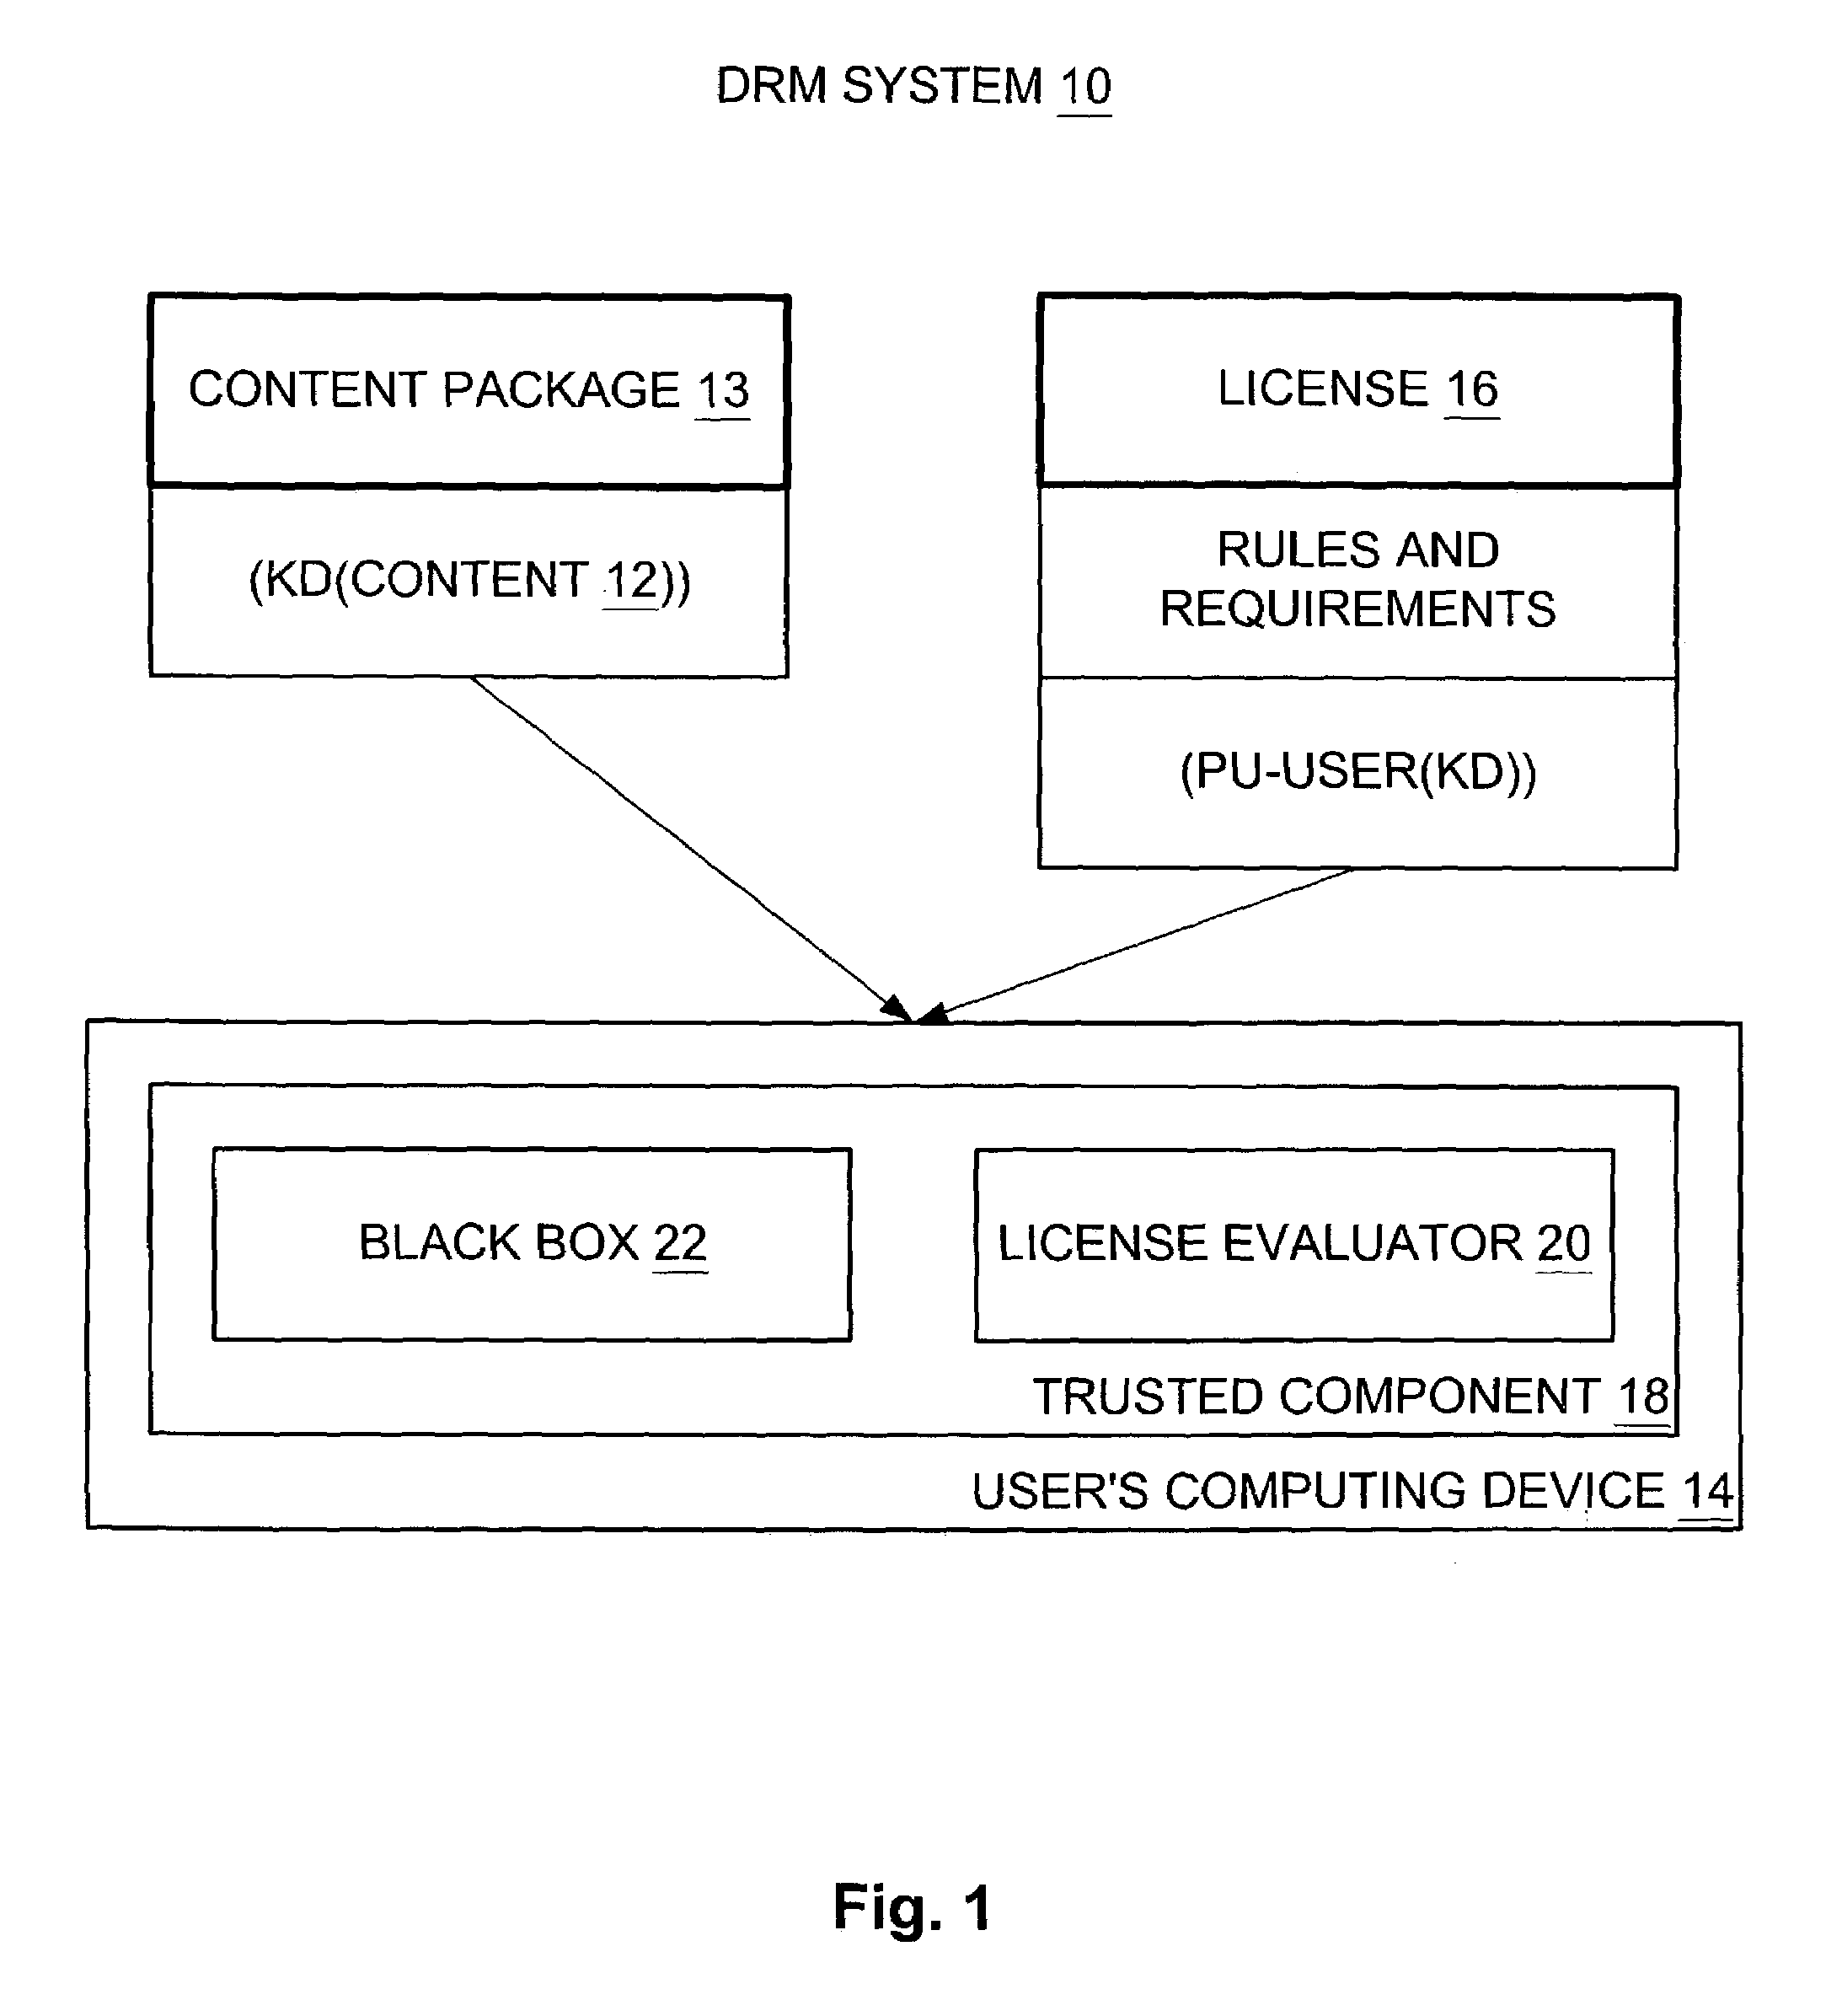 Tying a digital license to a user and tying the user to multiple computing devices in a digital rights management (DRM) system